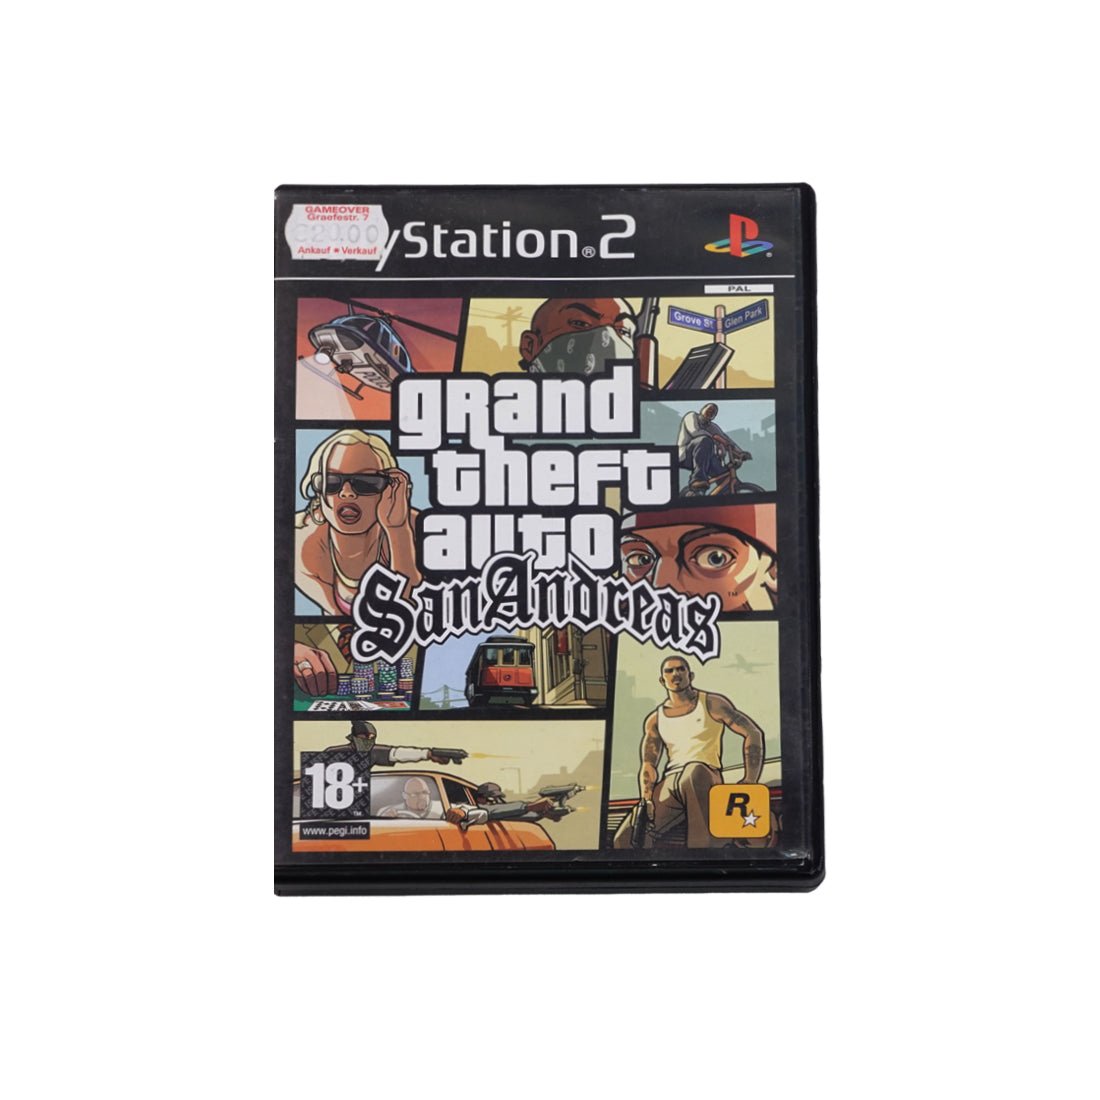 (Pre-Owned) Grand Theft Auto: SanAndreas - PlayStation 2 - Store 974 | ستور ٩٧٤